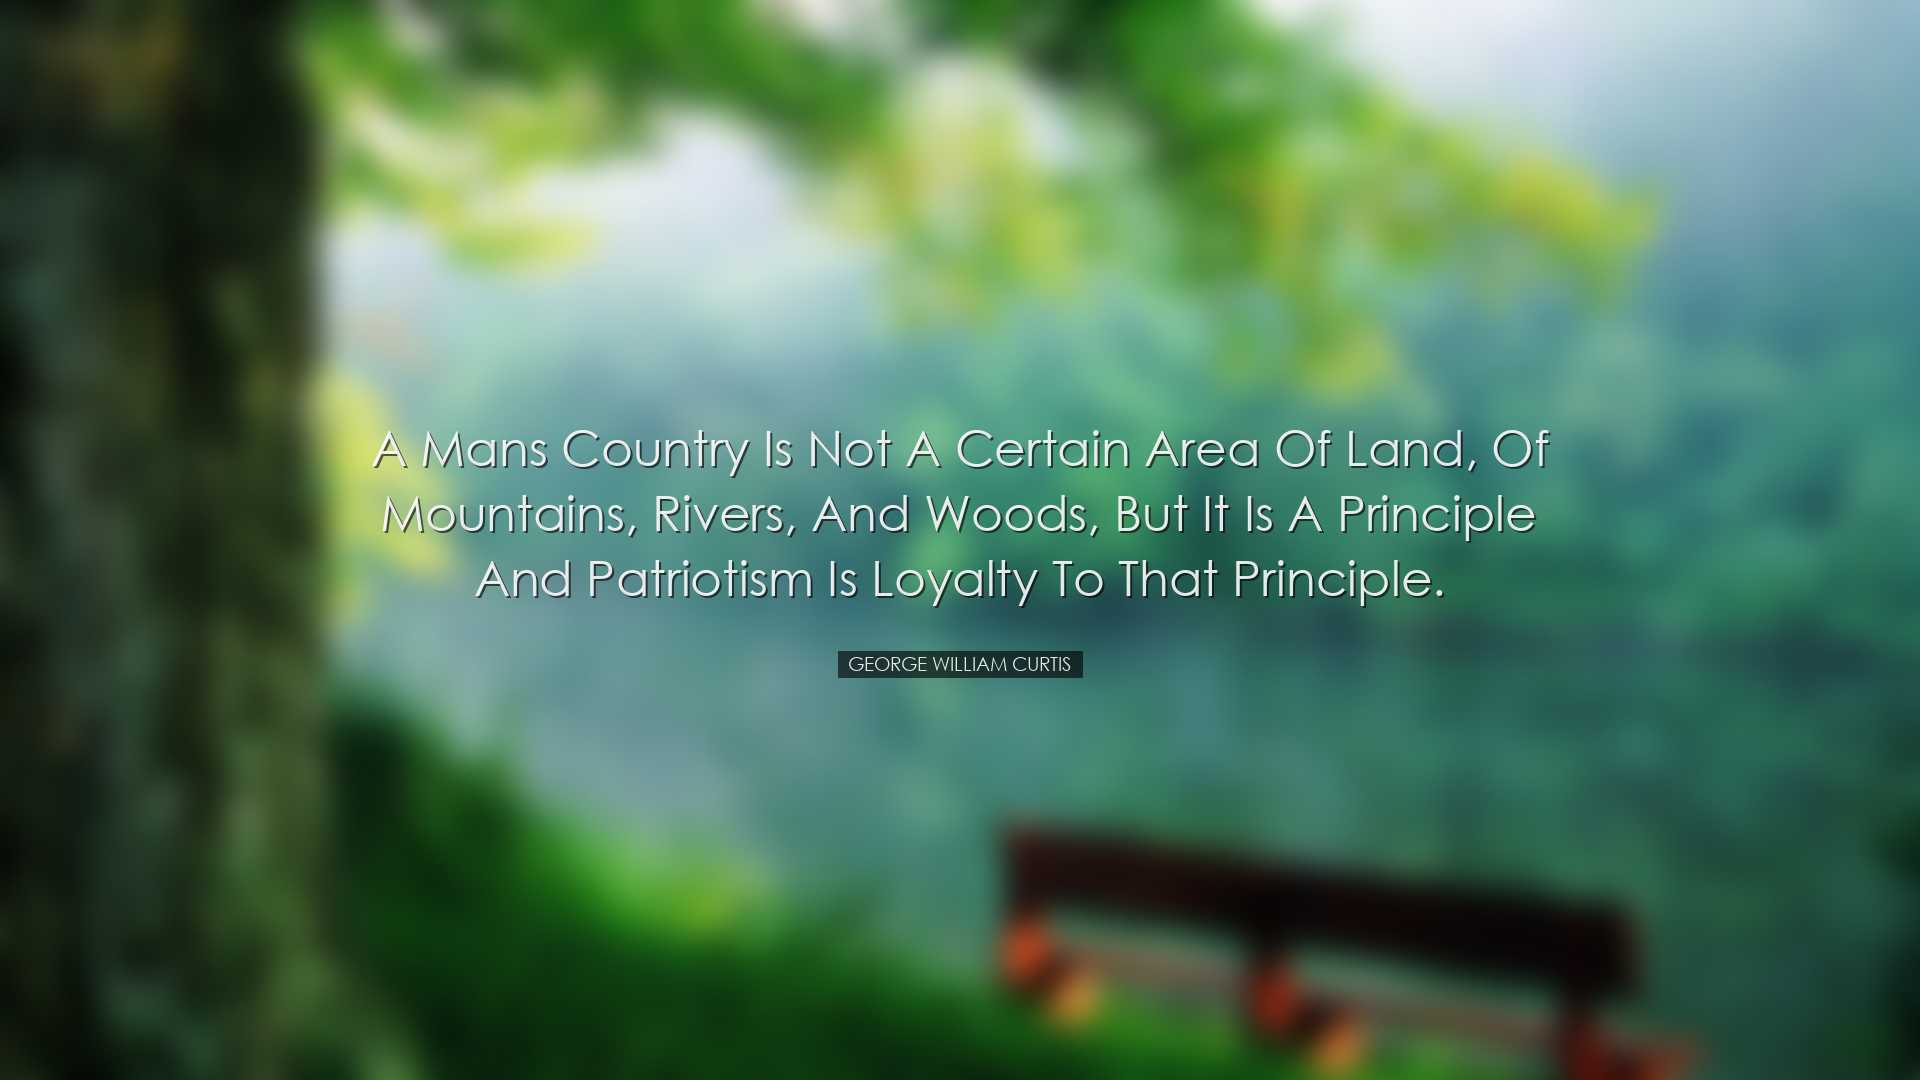 A mans country is not a certain area of land, of mountains, rivers